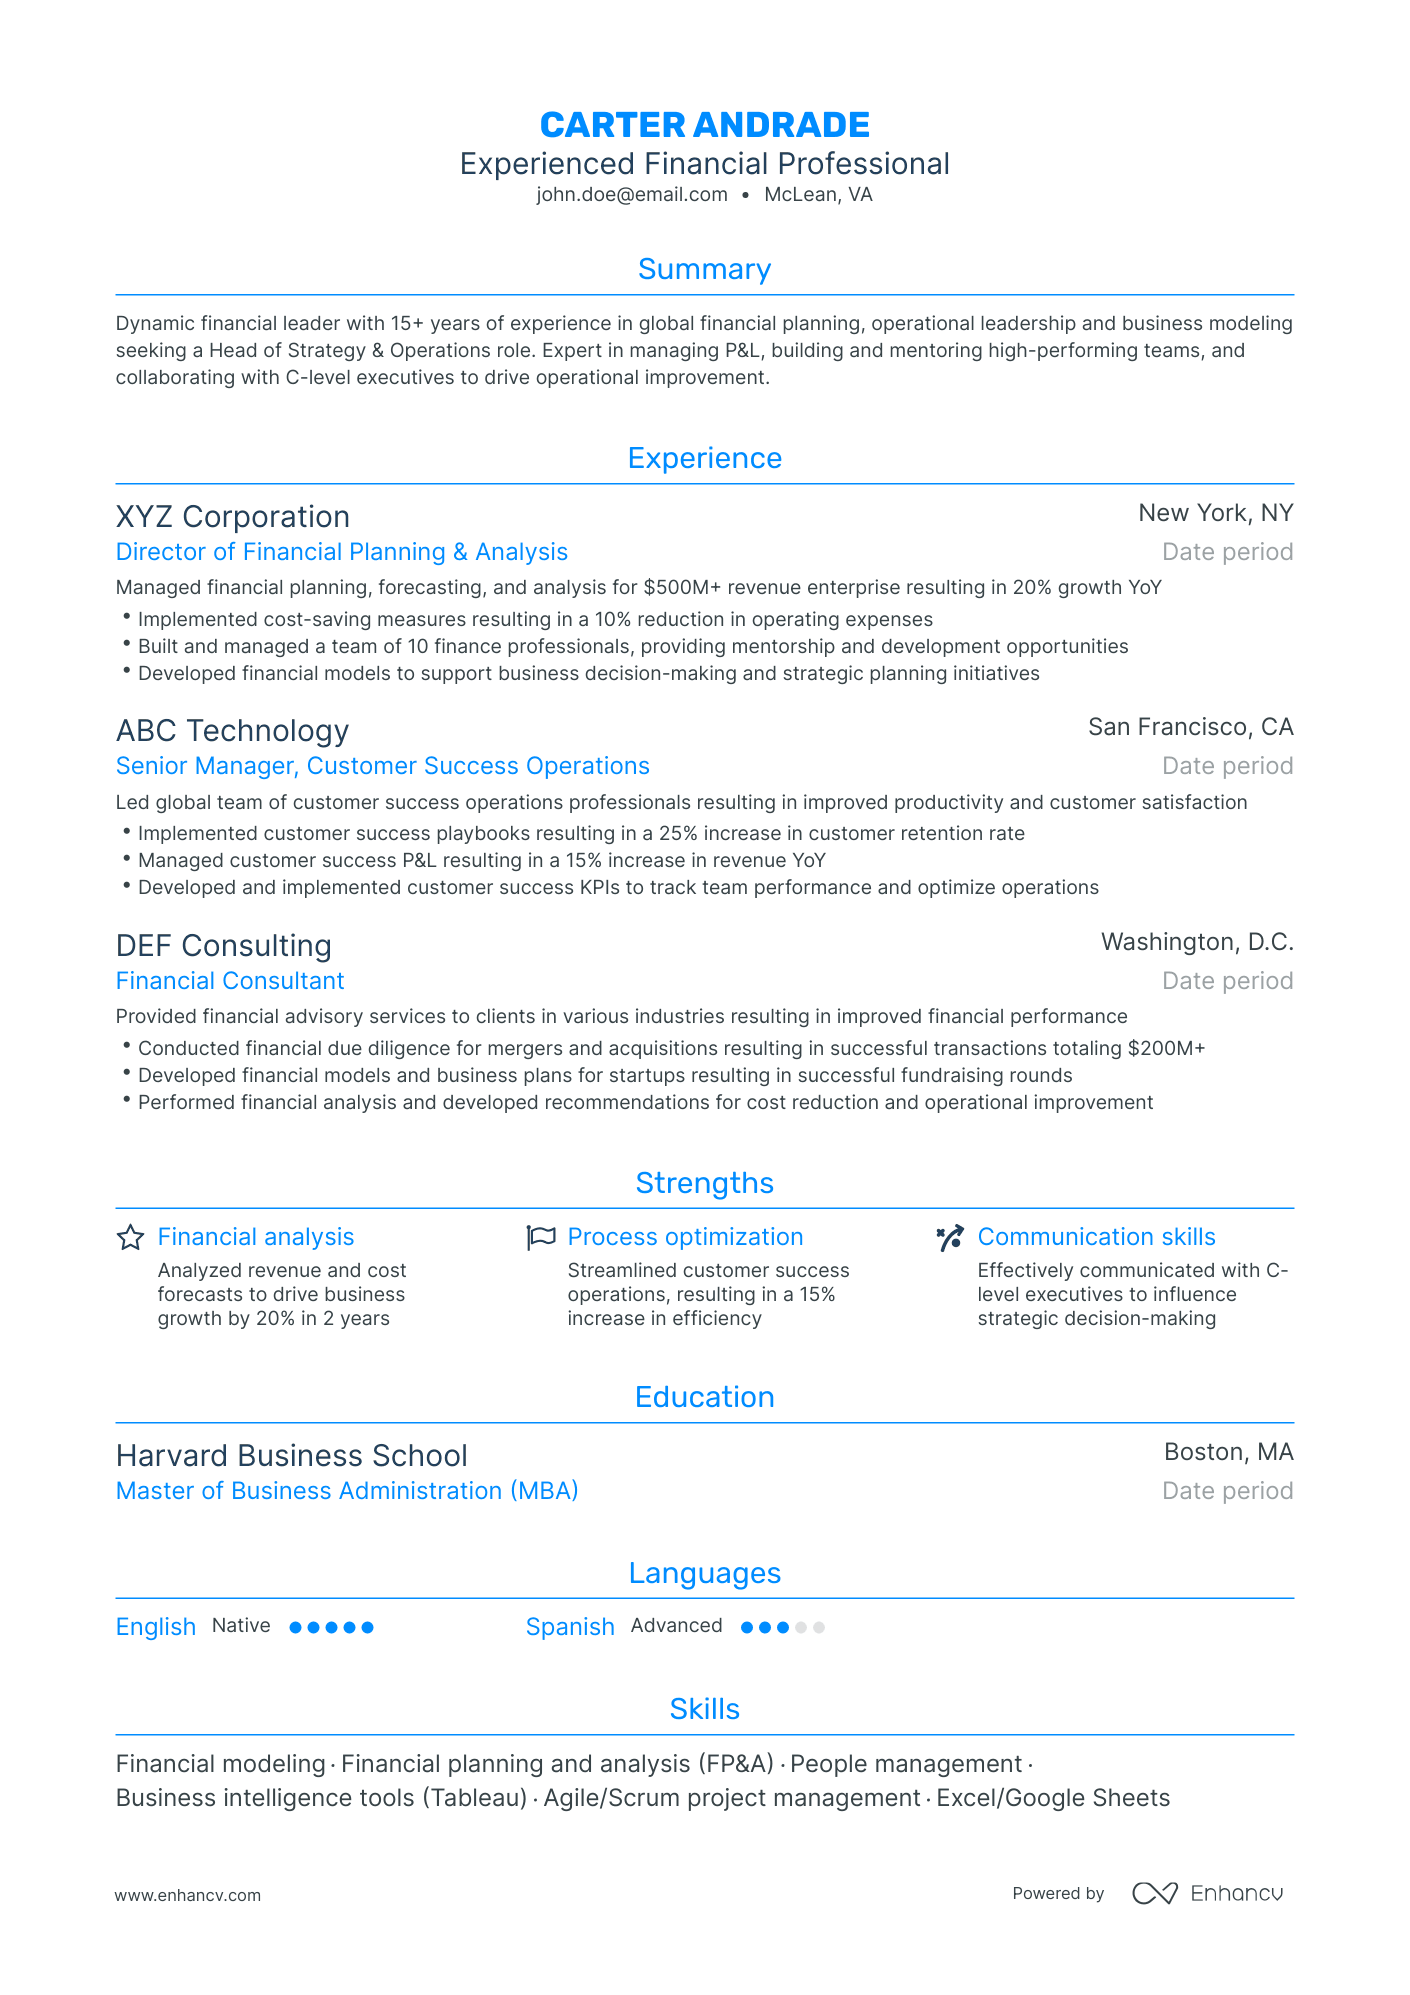 Traditional Financial Professional Resume Template